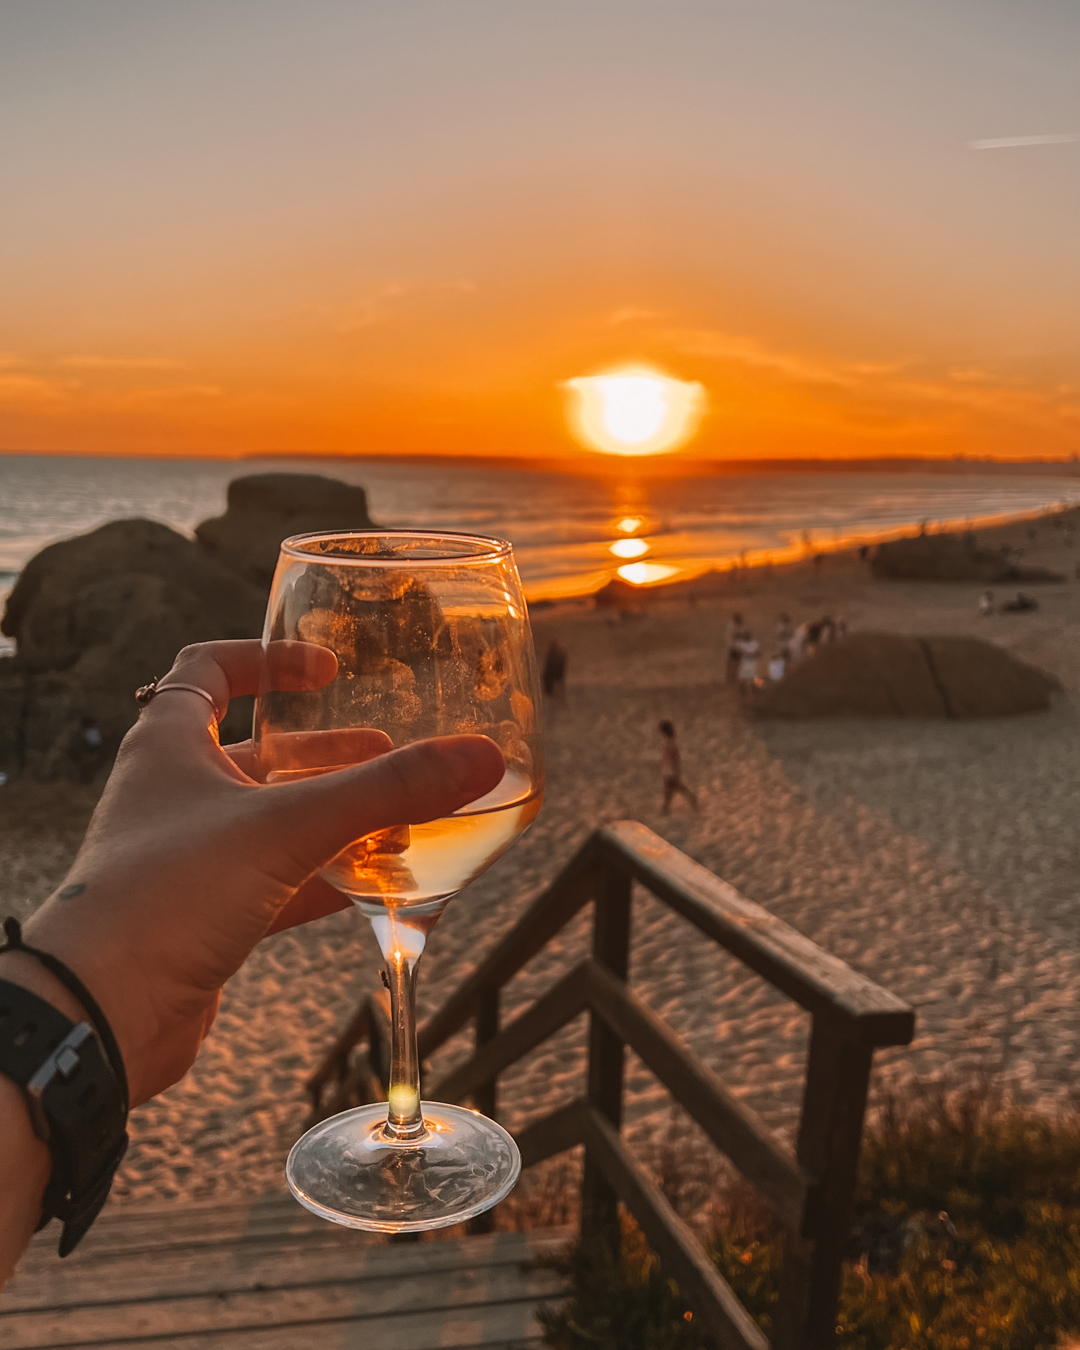 Sunset with wine over Praia da Gale - Top spots to visit in the Algarve